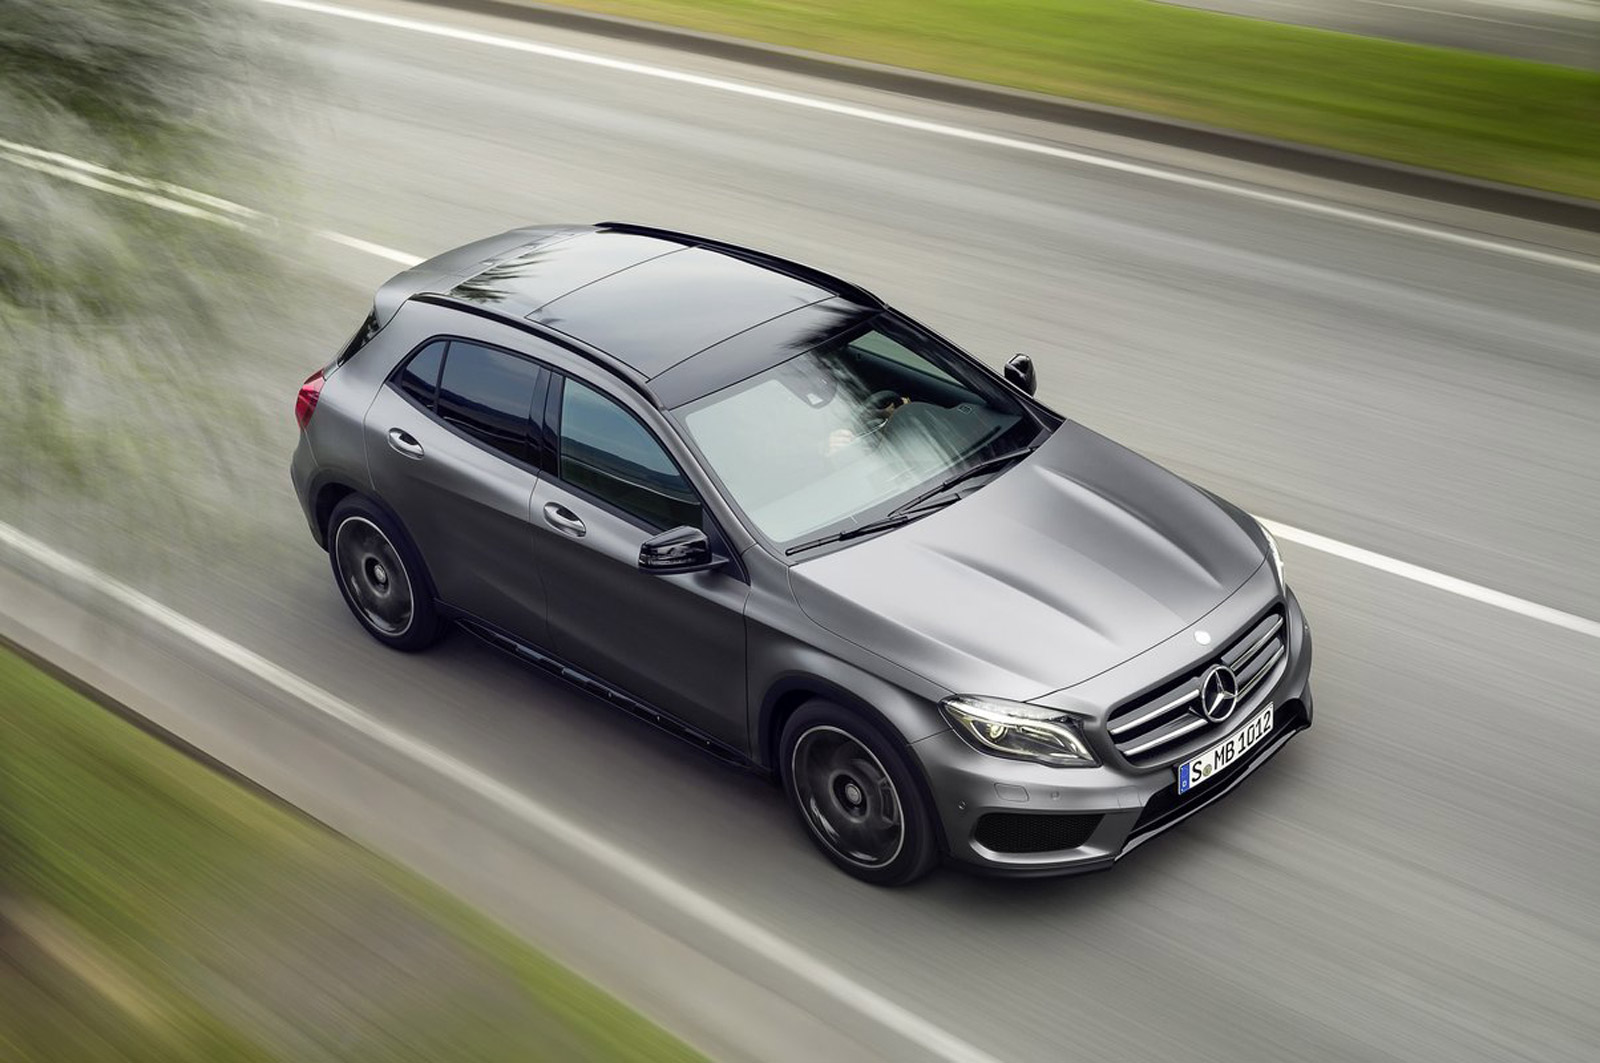 2015 Mercedes-Benz GLA-Class Priced From $32,225, GLA45 AMG From $49,225